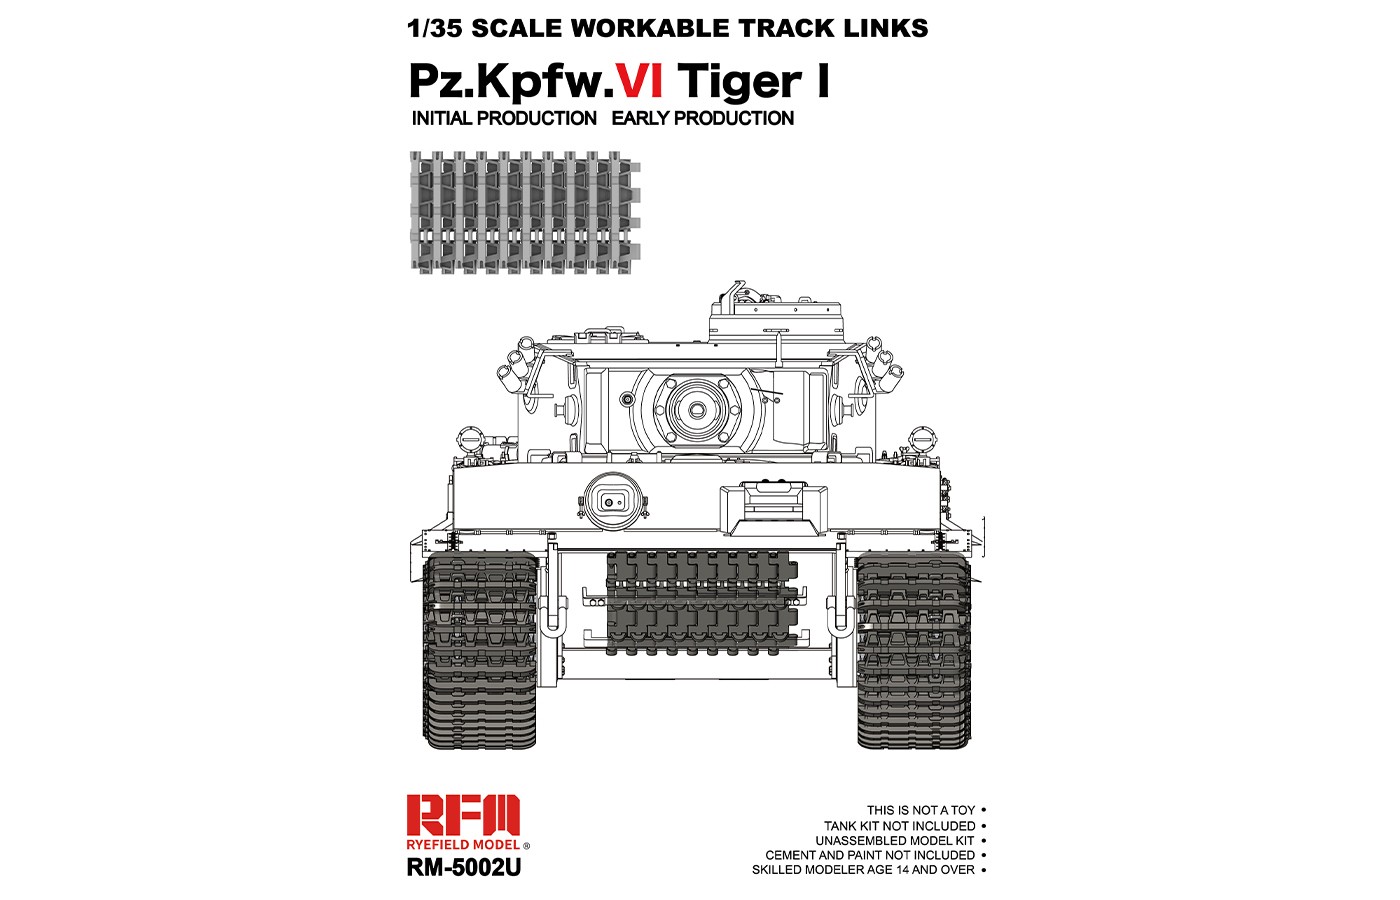 RyeField Model RFM RM5002 1/35 Workable track for Tiger I early production Tank 